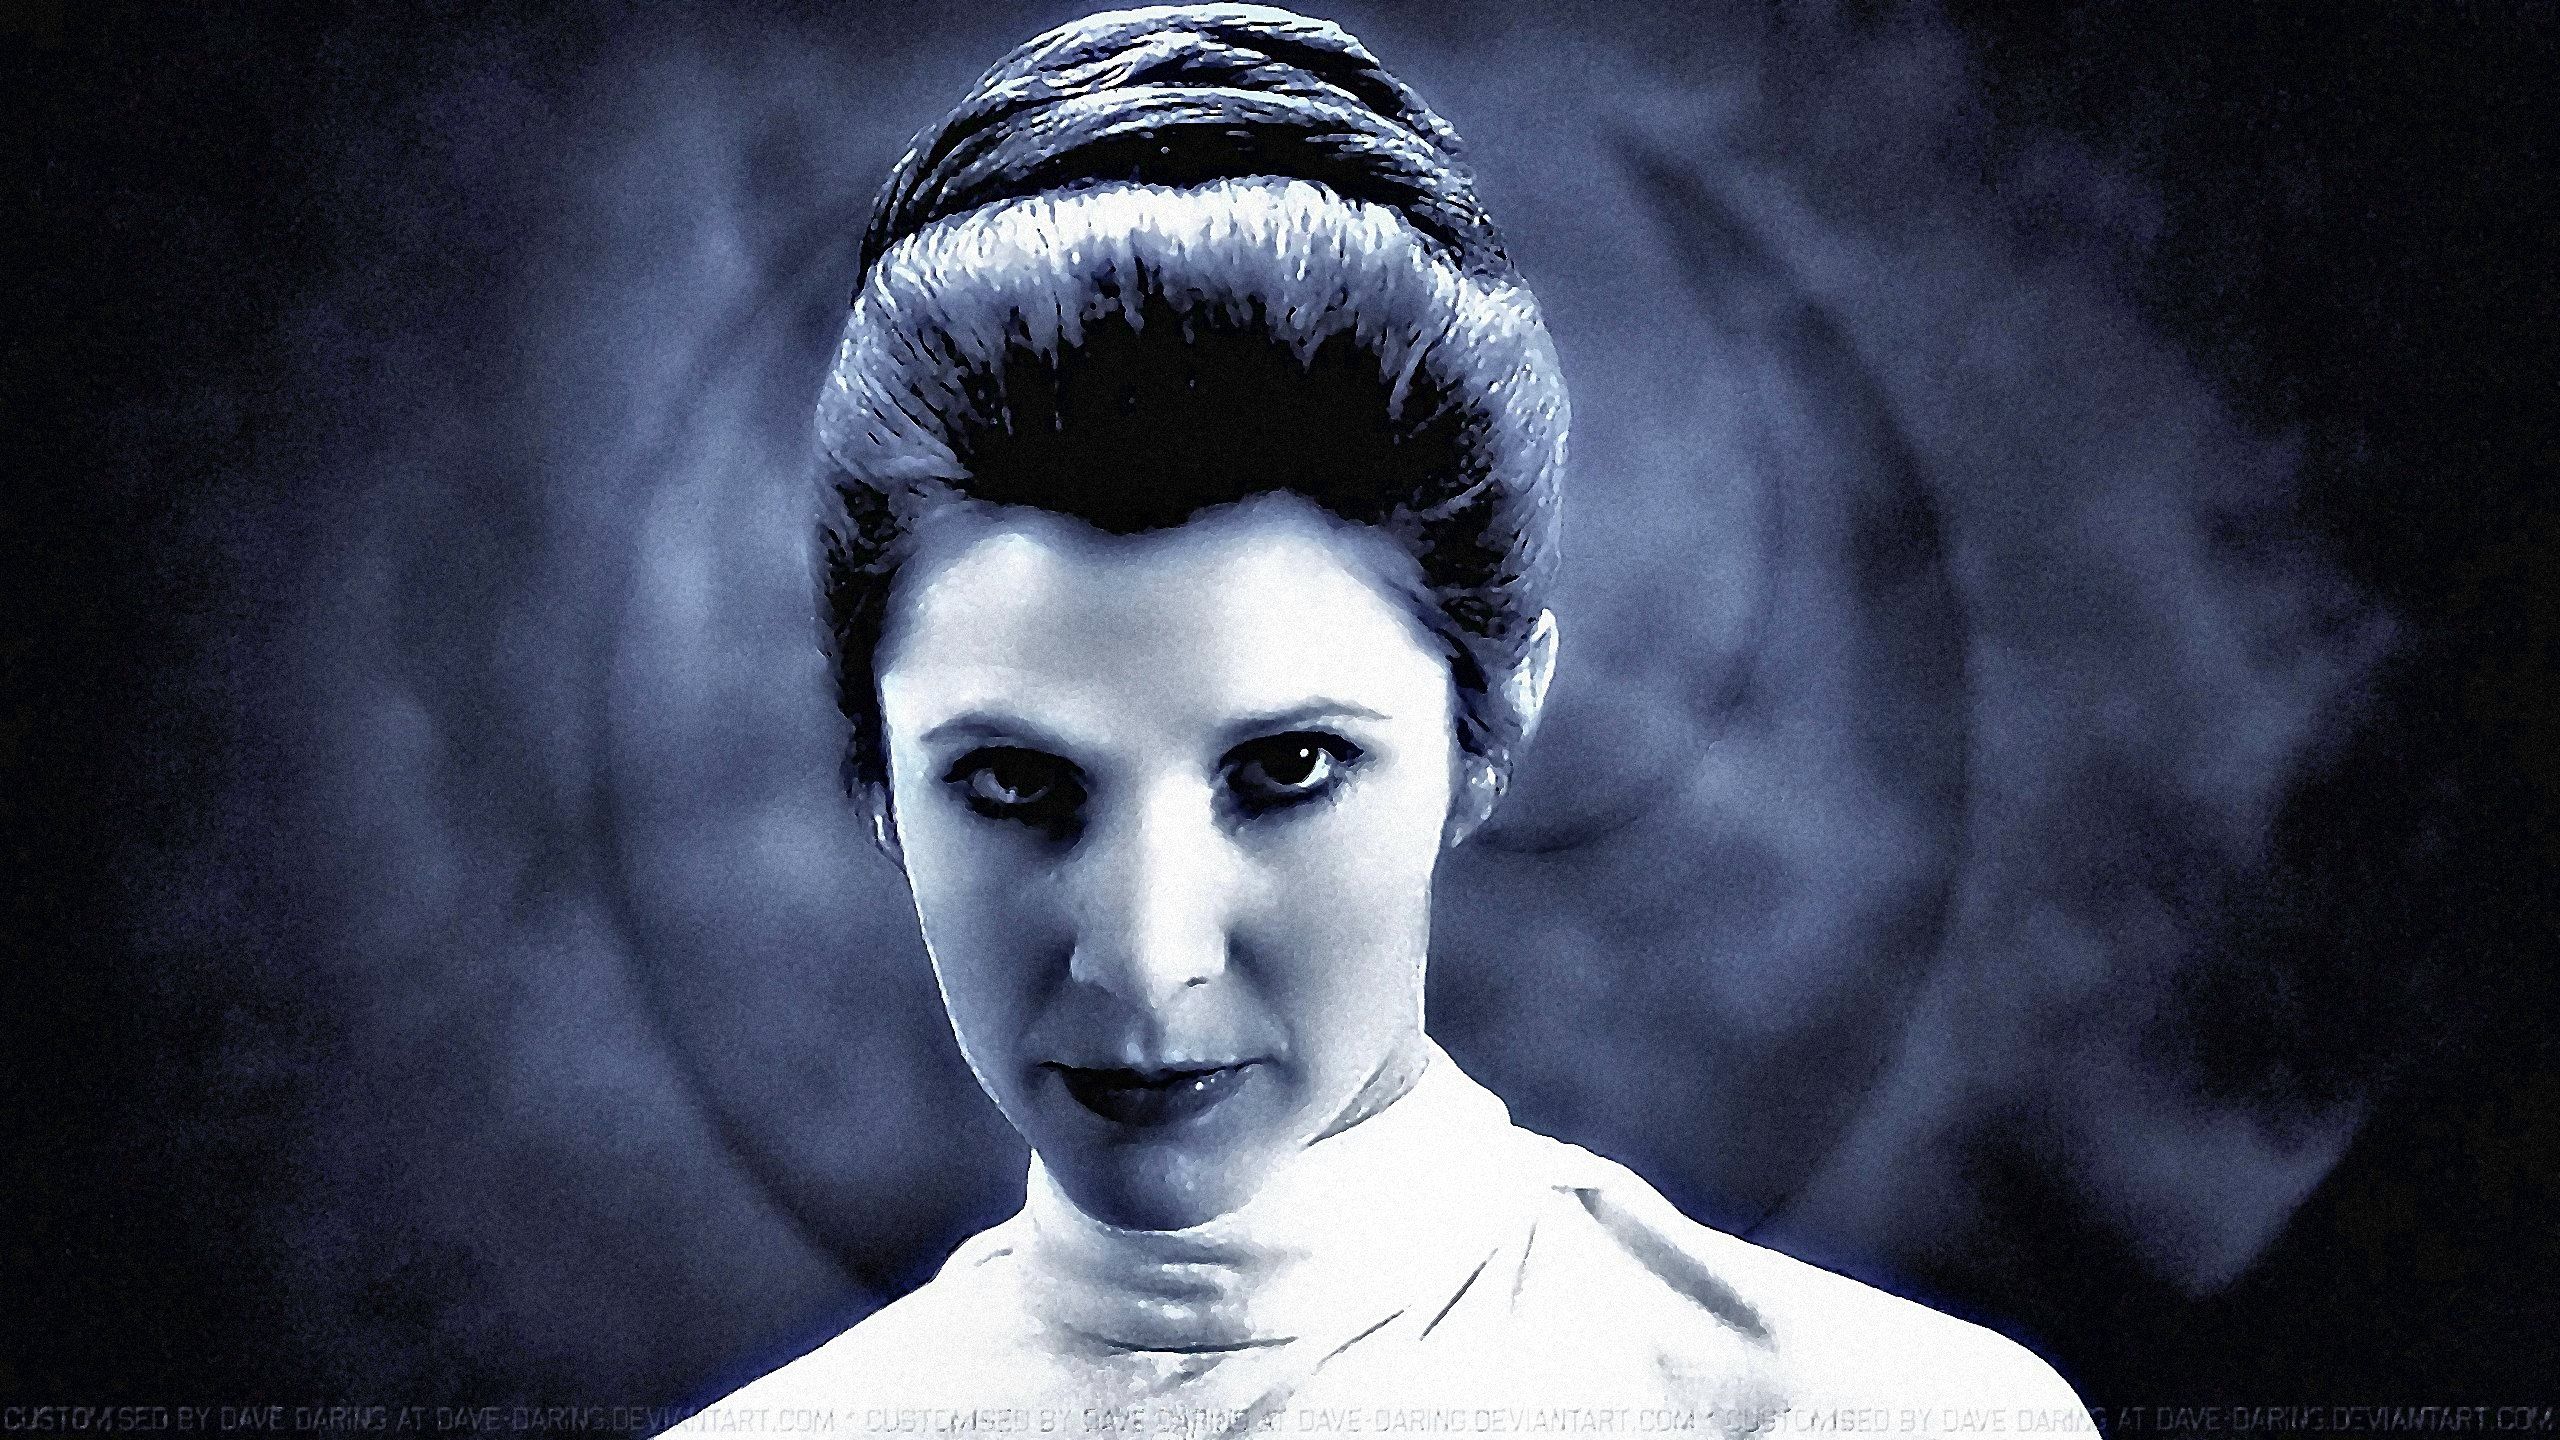 Carrie Fisher Princess Leia XXXIX by Dave-Daring on DeviantArt